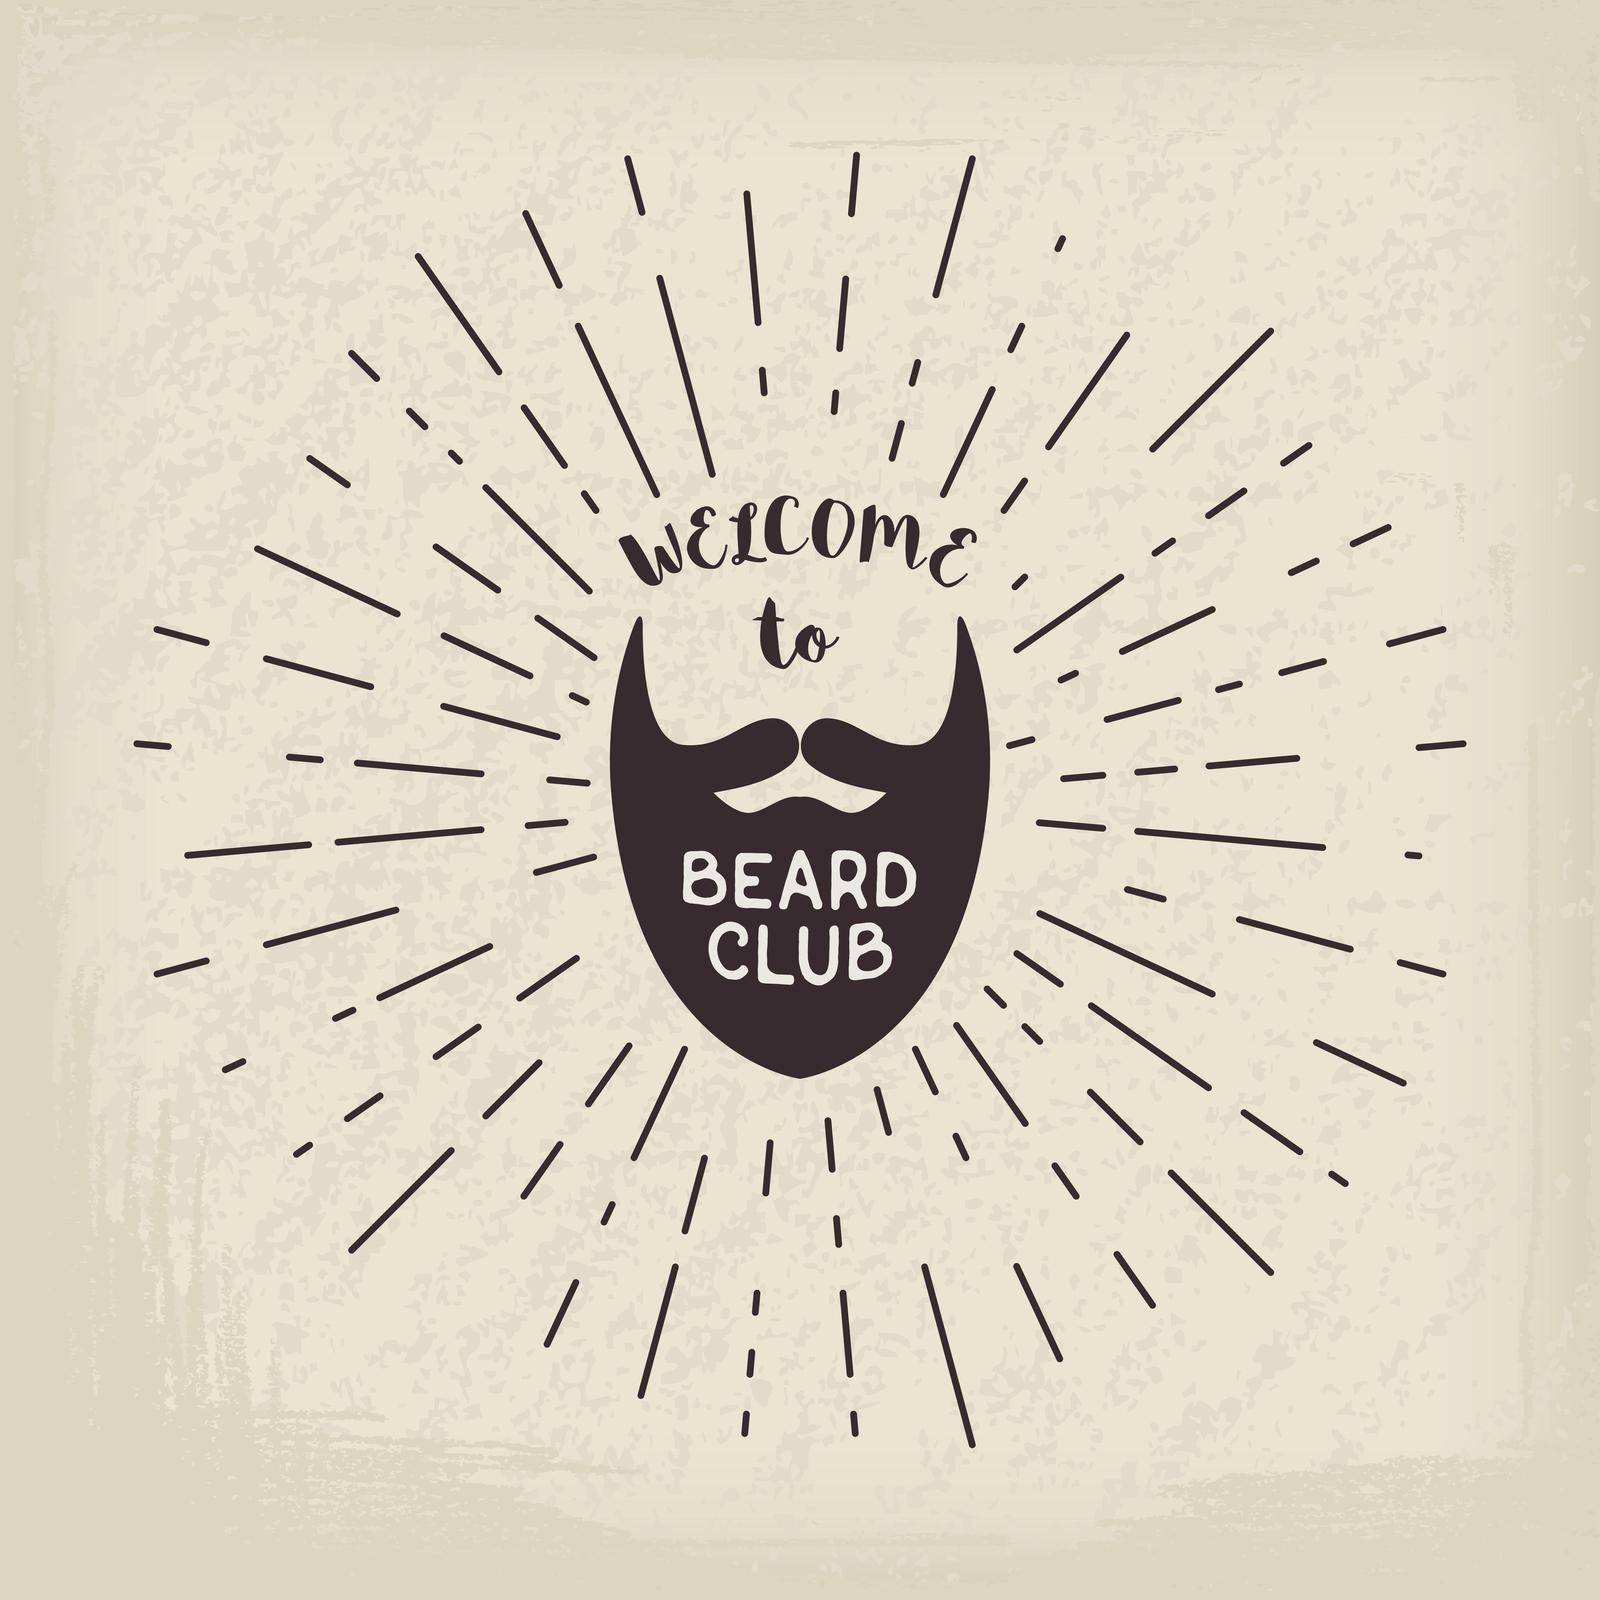 Retro badge with beard and Welcome to Beard Club lettering. Vector background